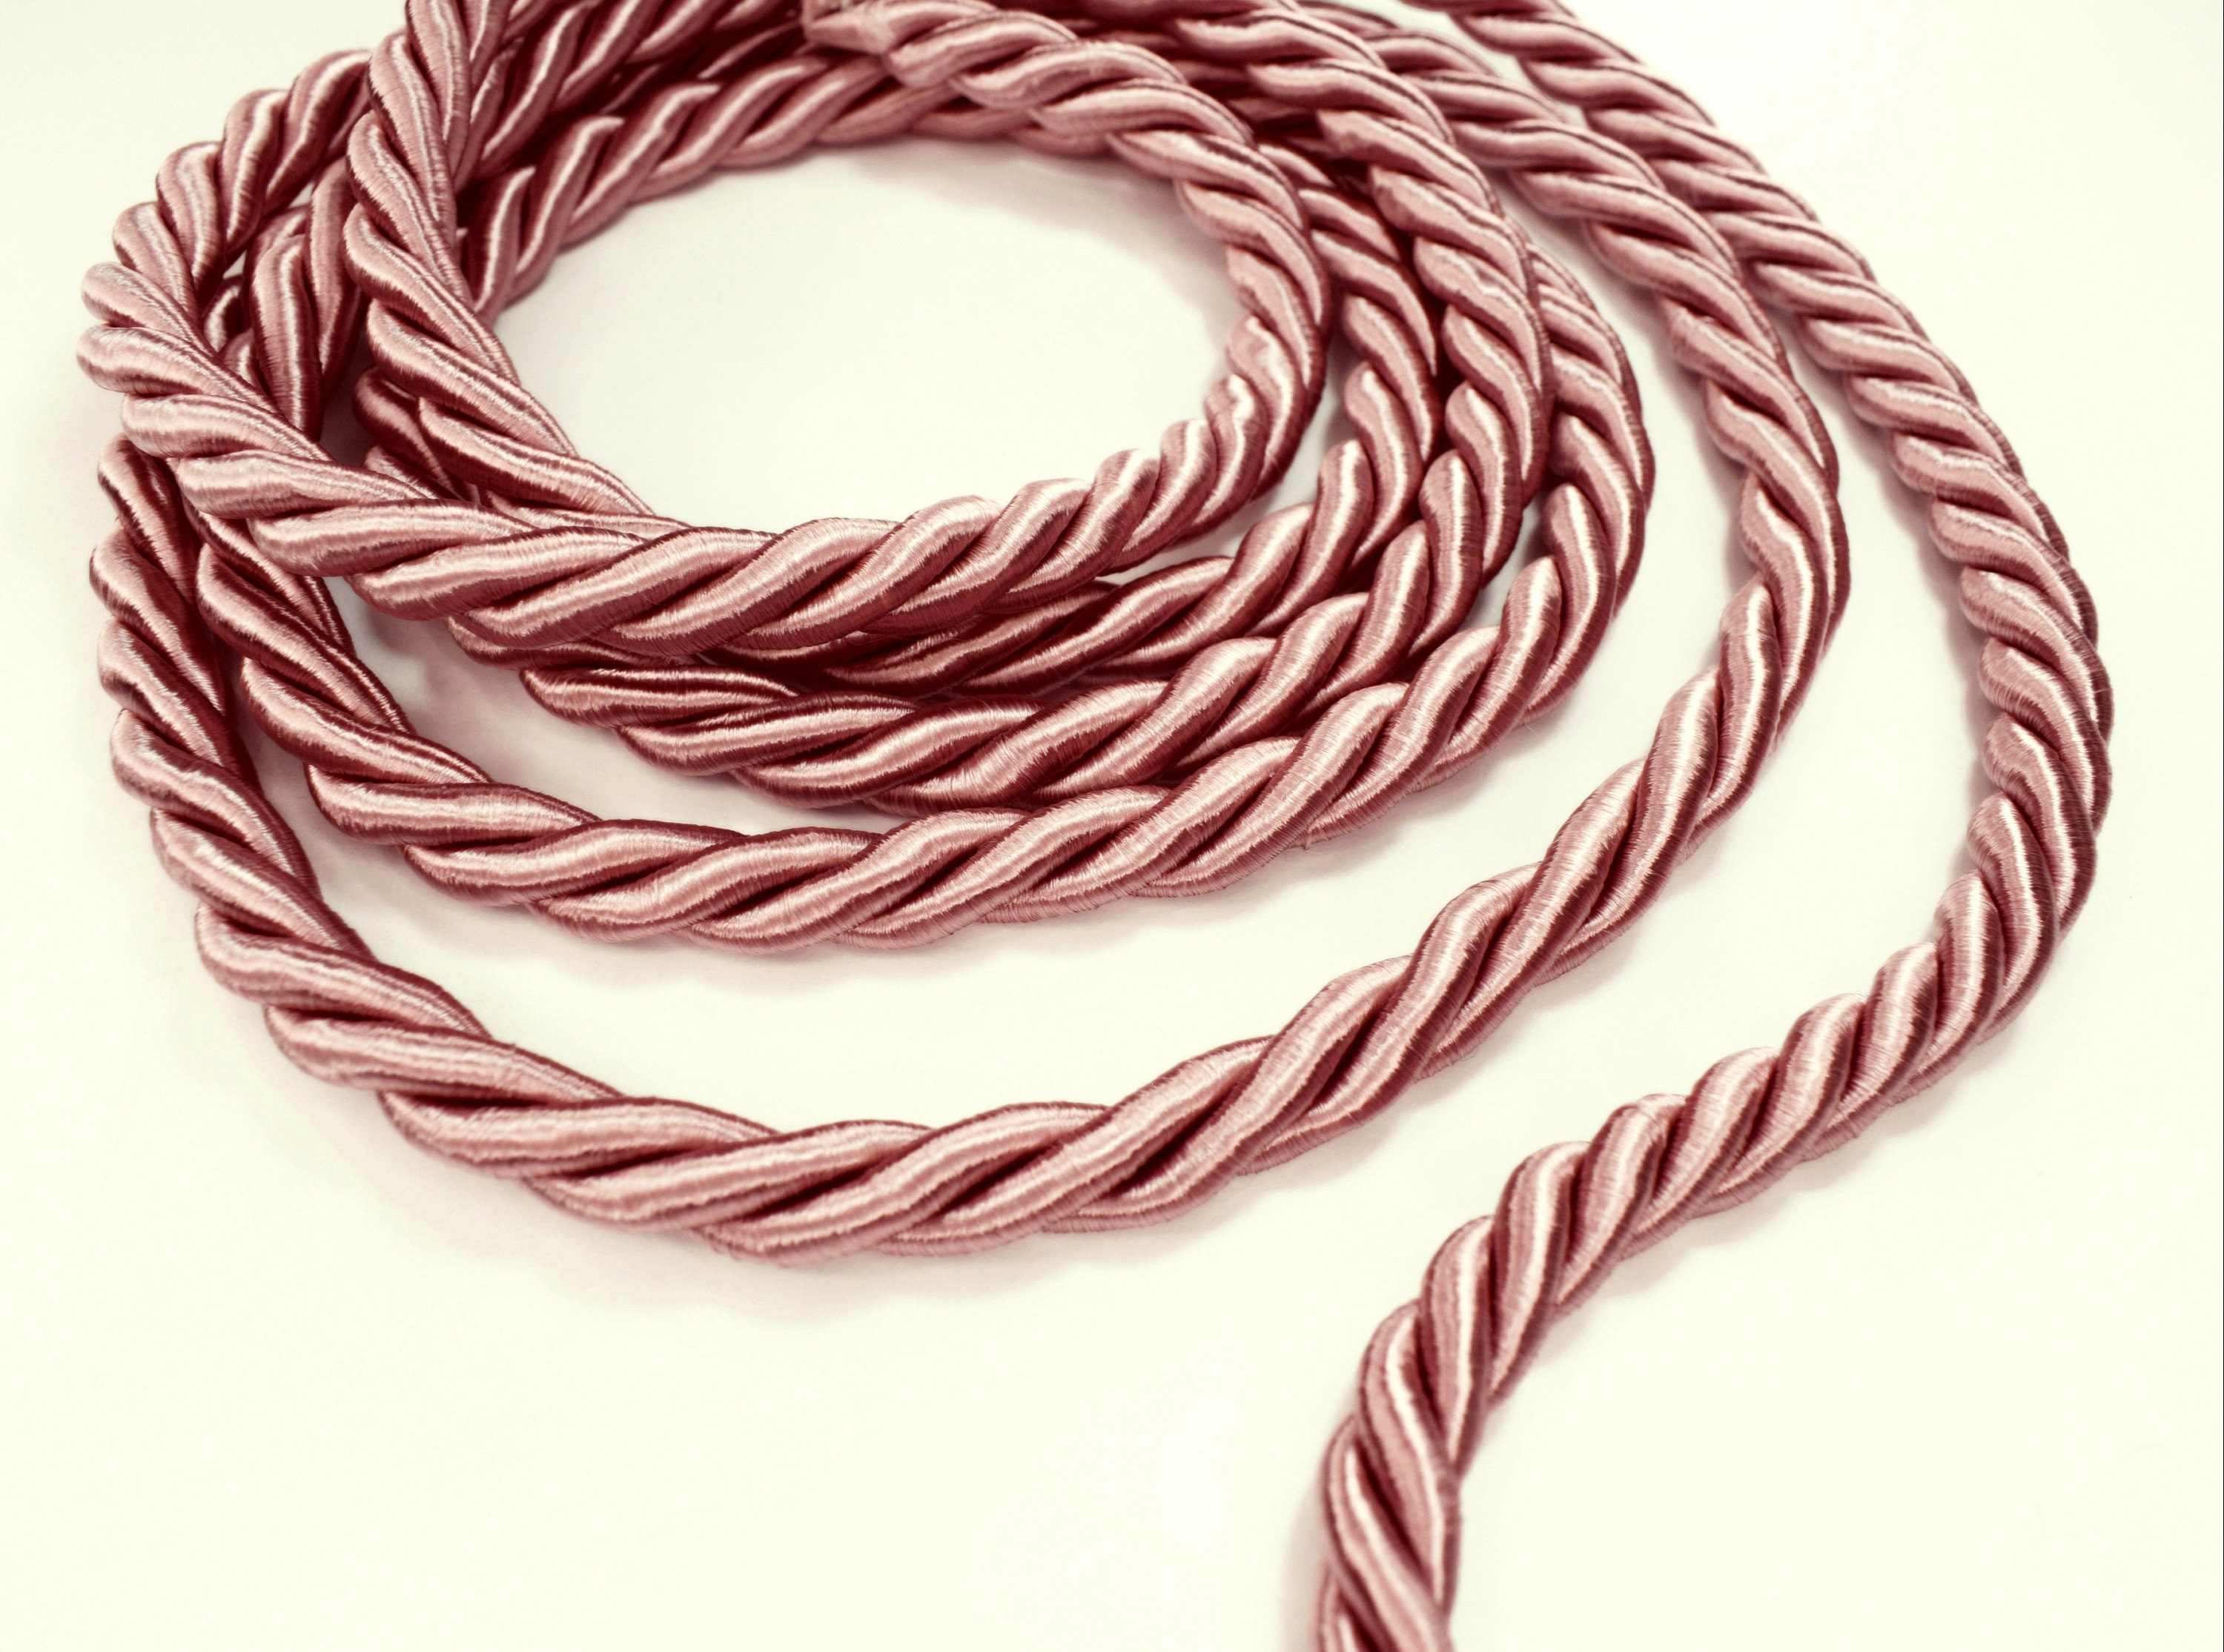 6mm Cotton Cord, Powder Pink Twisted Cotton Rope 6mm, Powder Pink